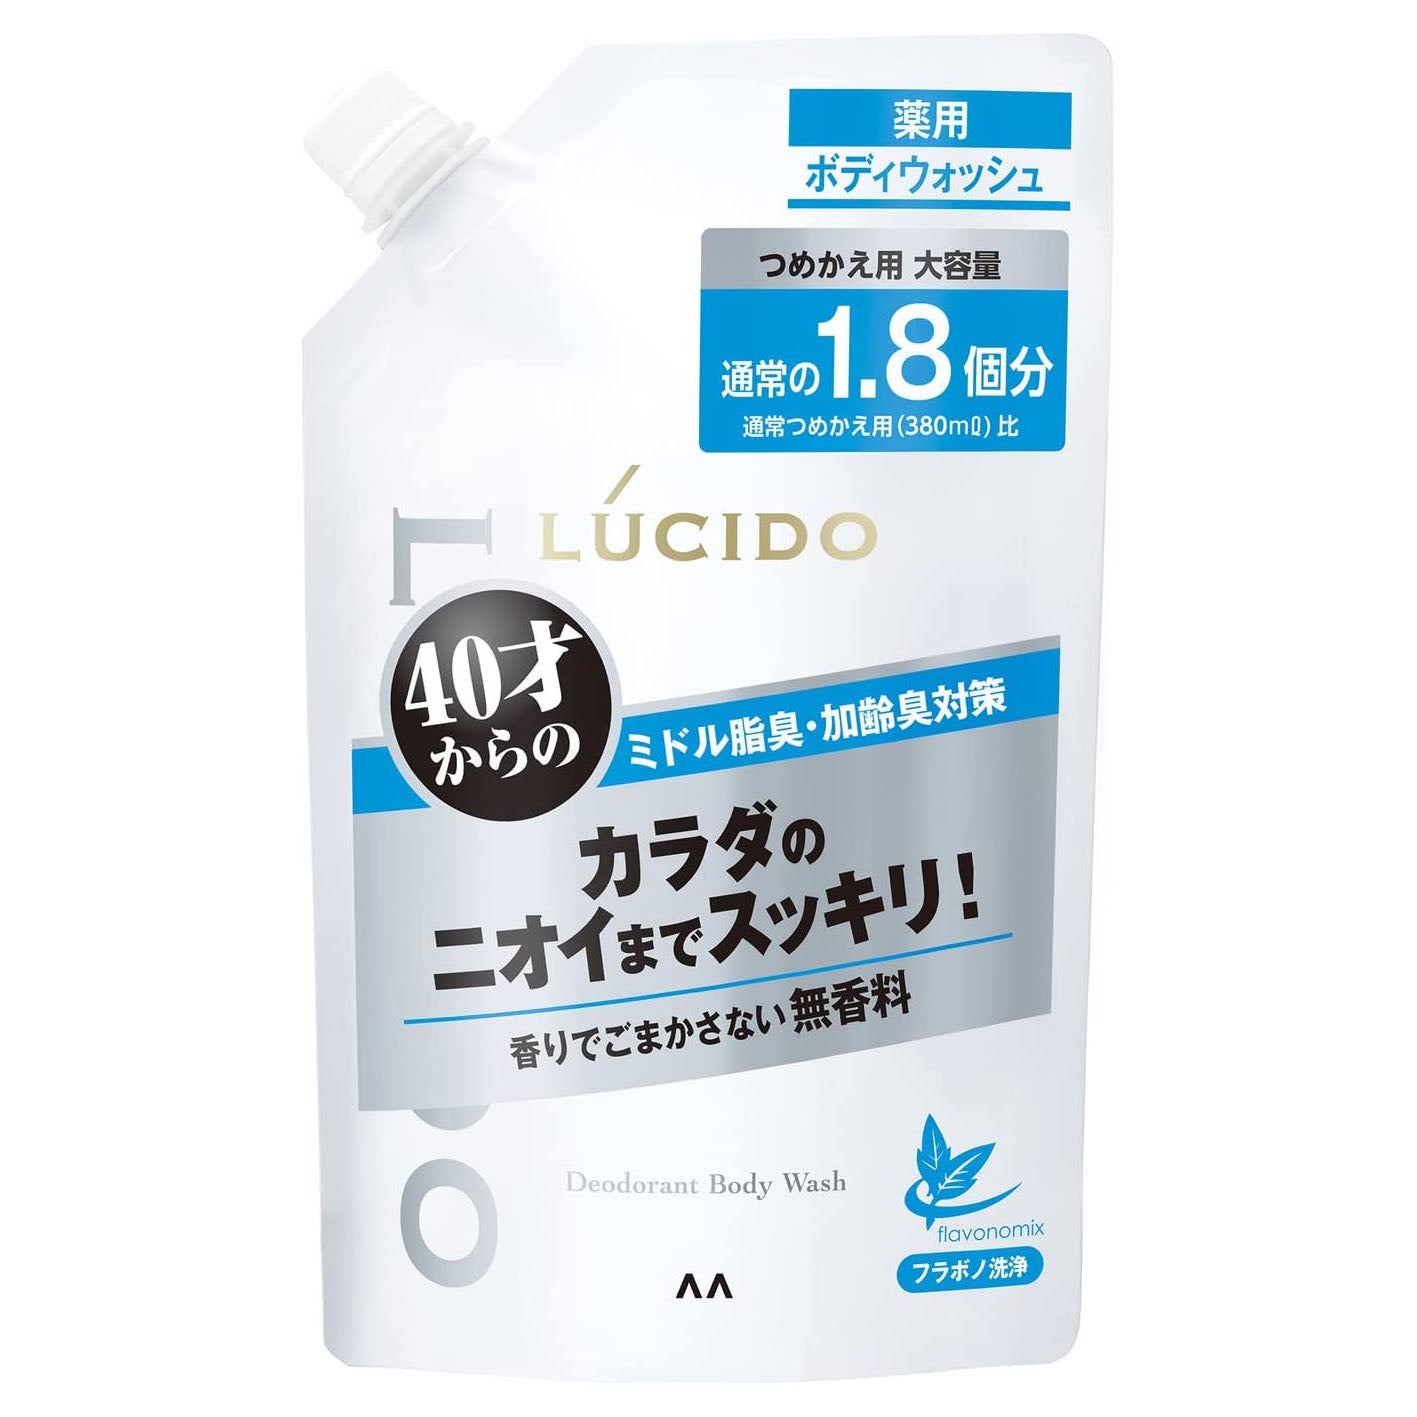 Lucido Medicated Deodorant Body Wash 684ml - Refill - Harajuku Culture Japan - Japanease Products Store Beauty and Stationery